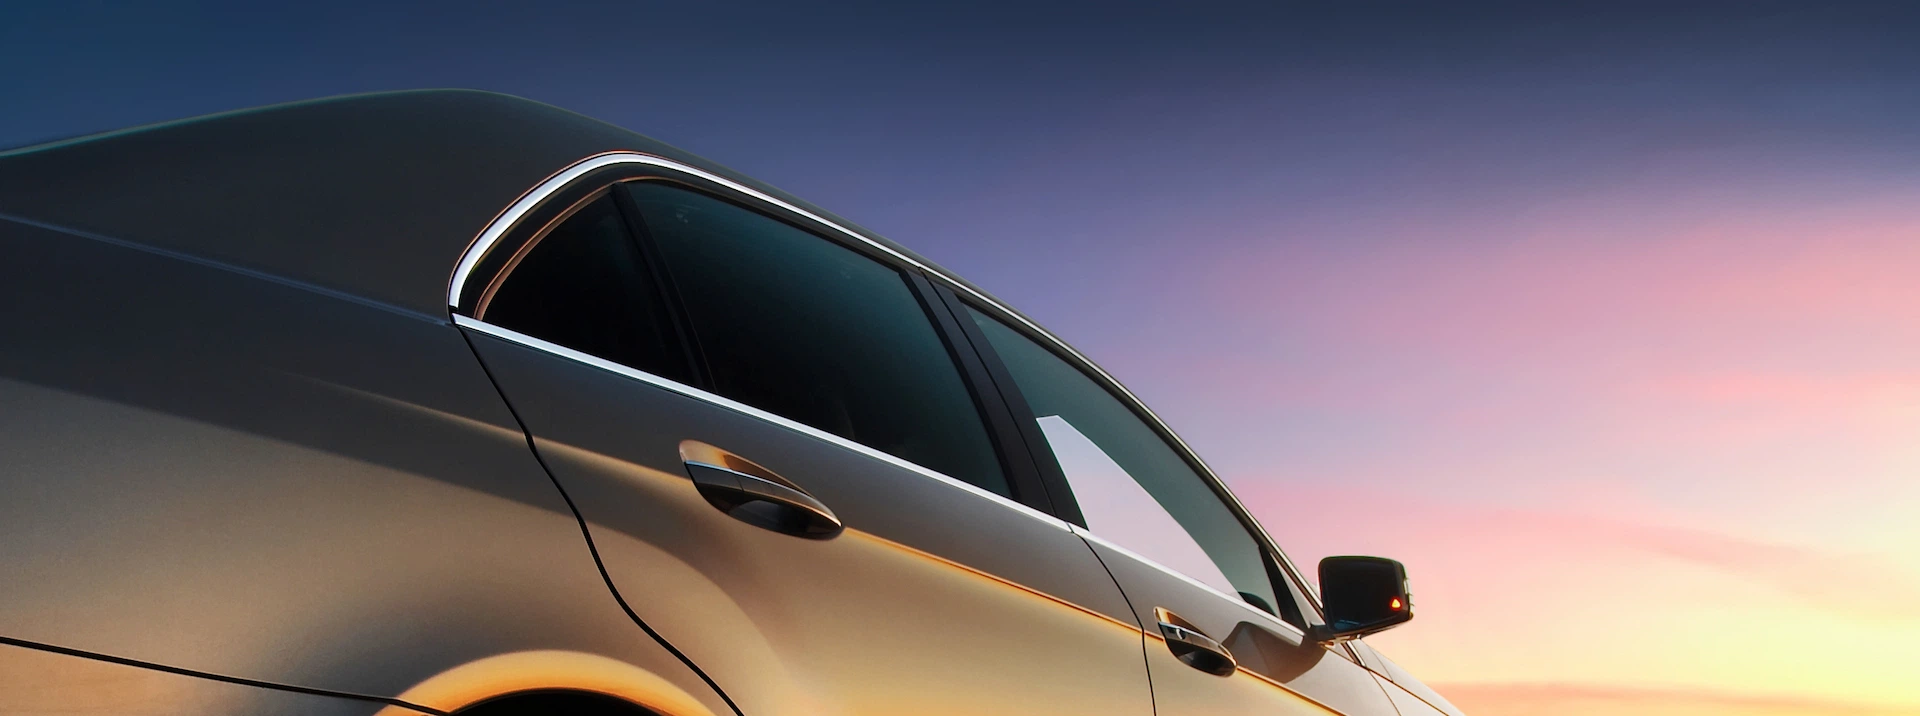 Car with heat-shielding for optimal EV efficiency and glass that illuminates at sunset.